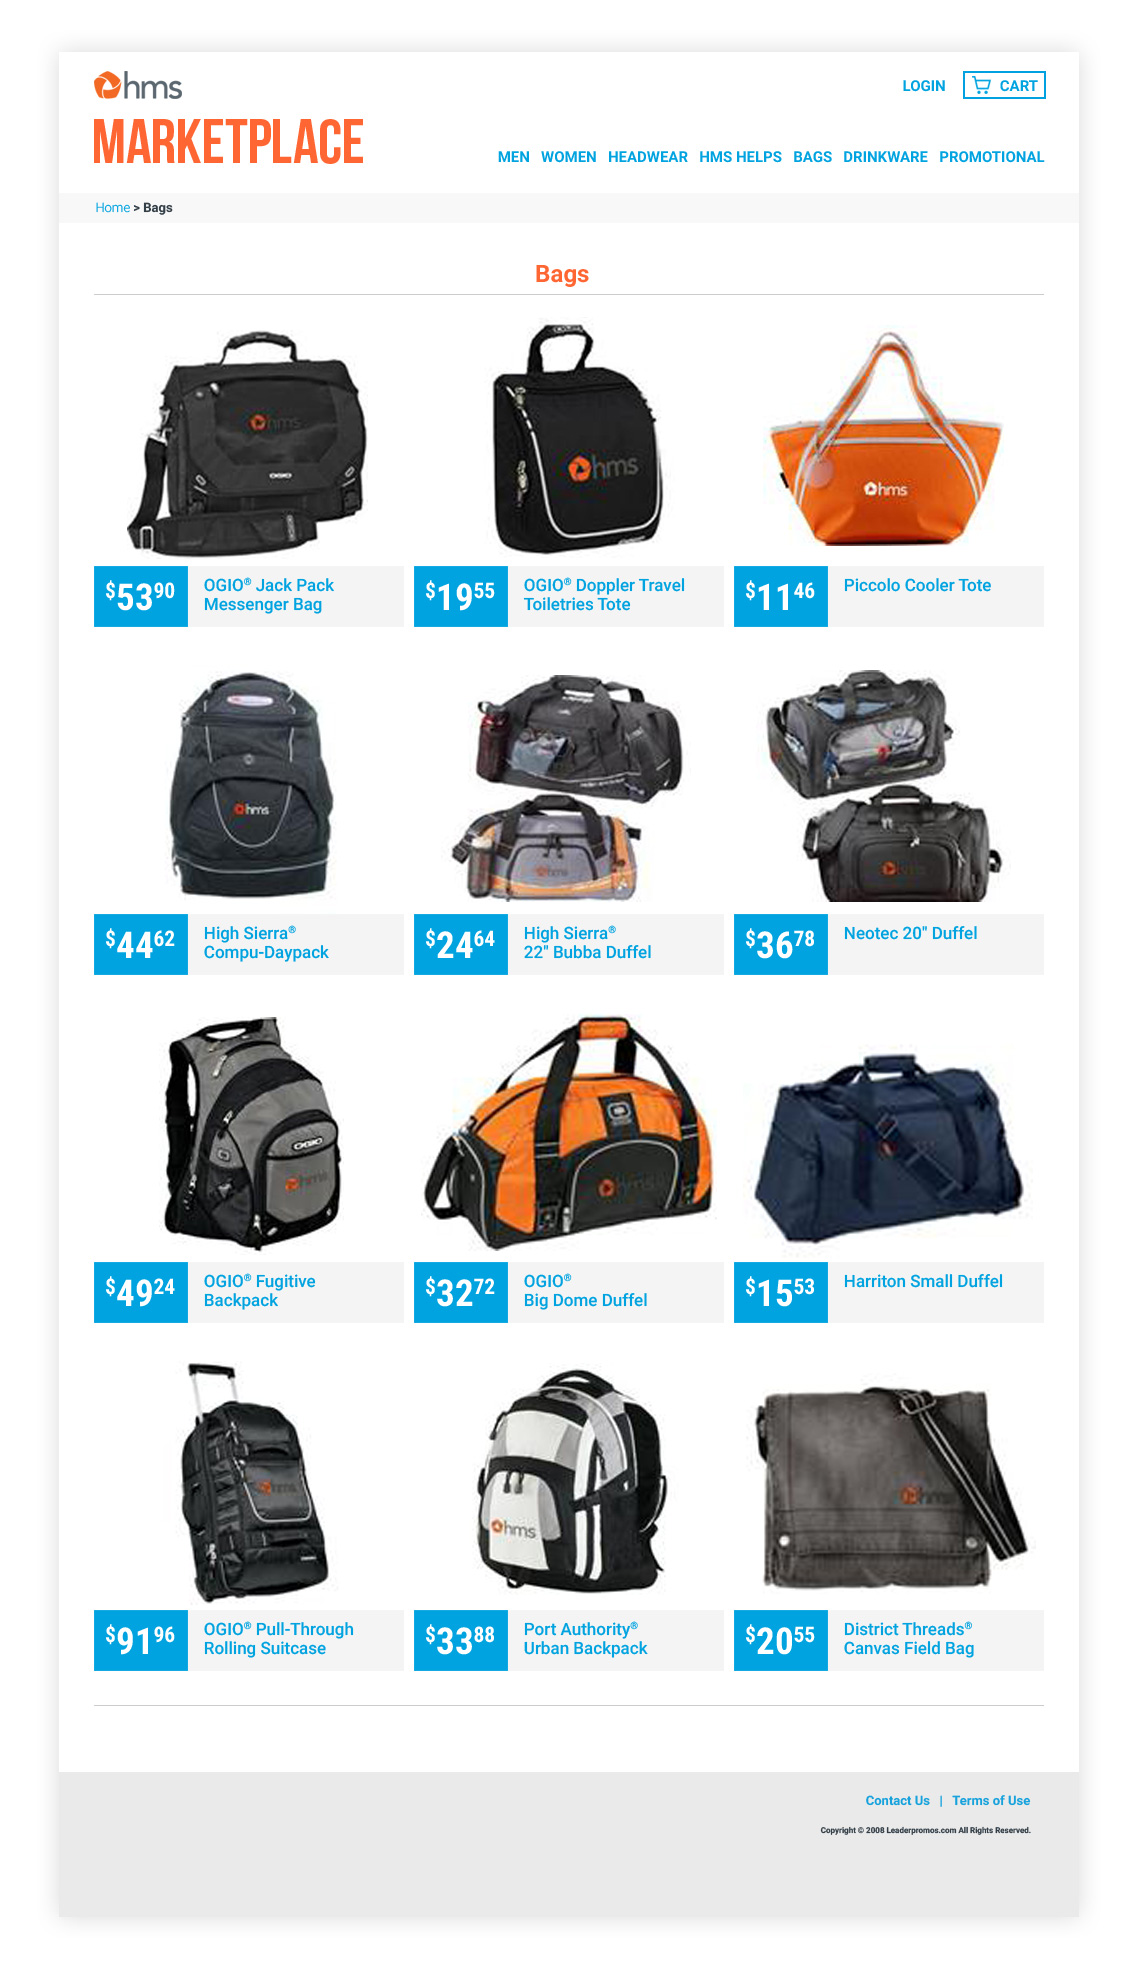 HMS Marketplace product category page